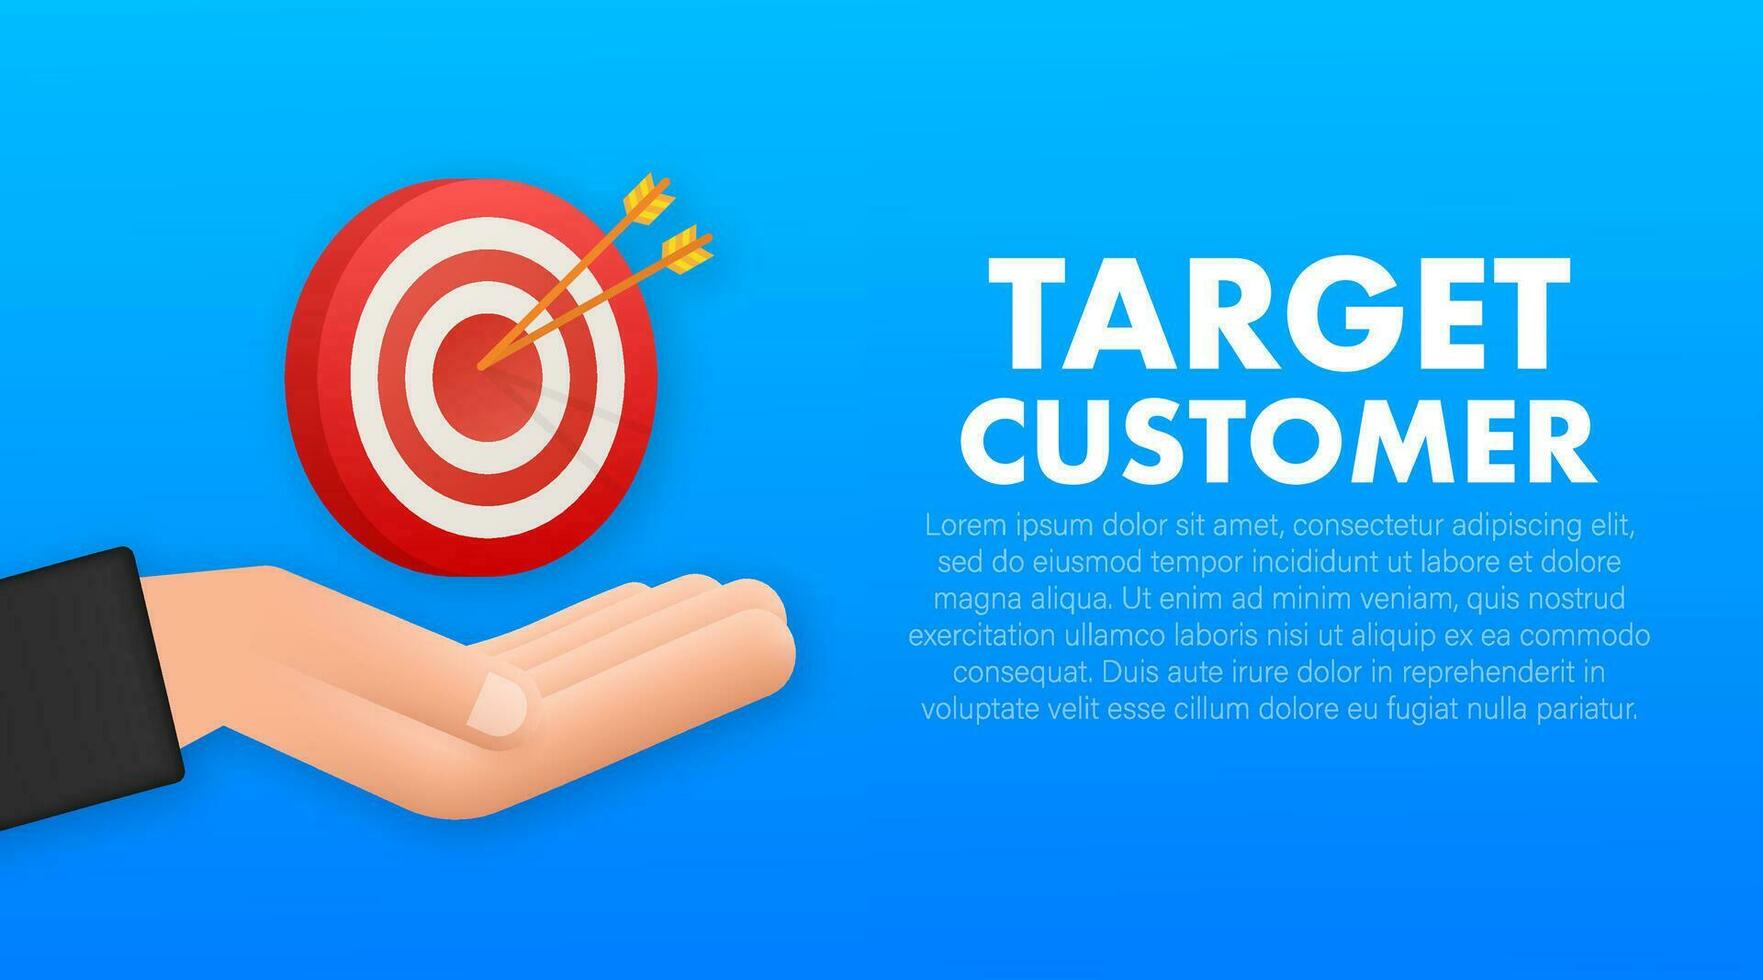 Target customer with an arrow on hands flat icon concept market goal vector picture image. Concept target market.